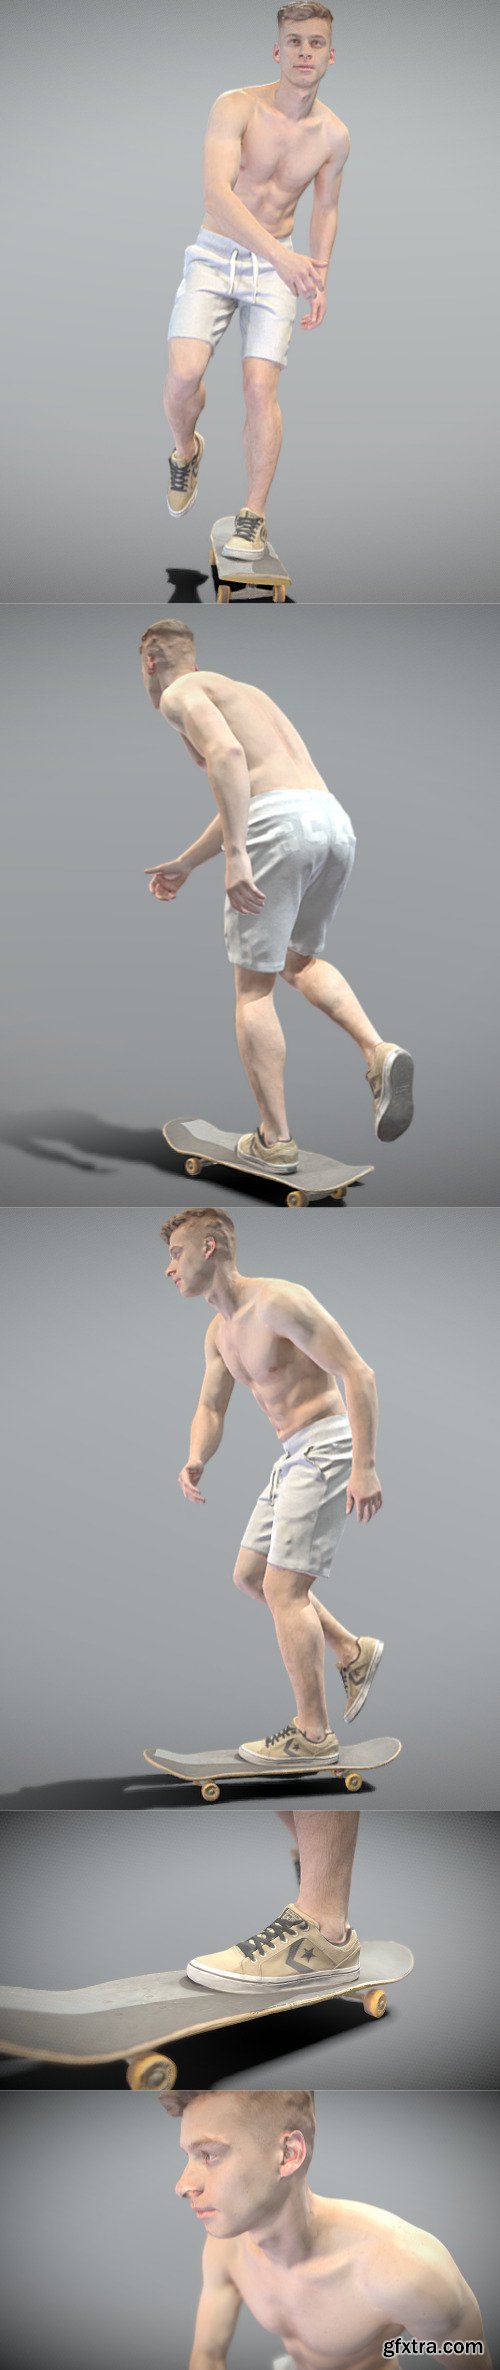 Athletic young man riding a skateboard 169